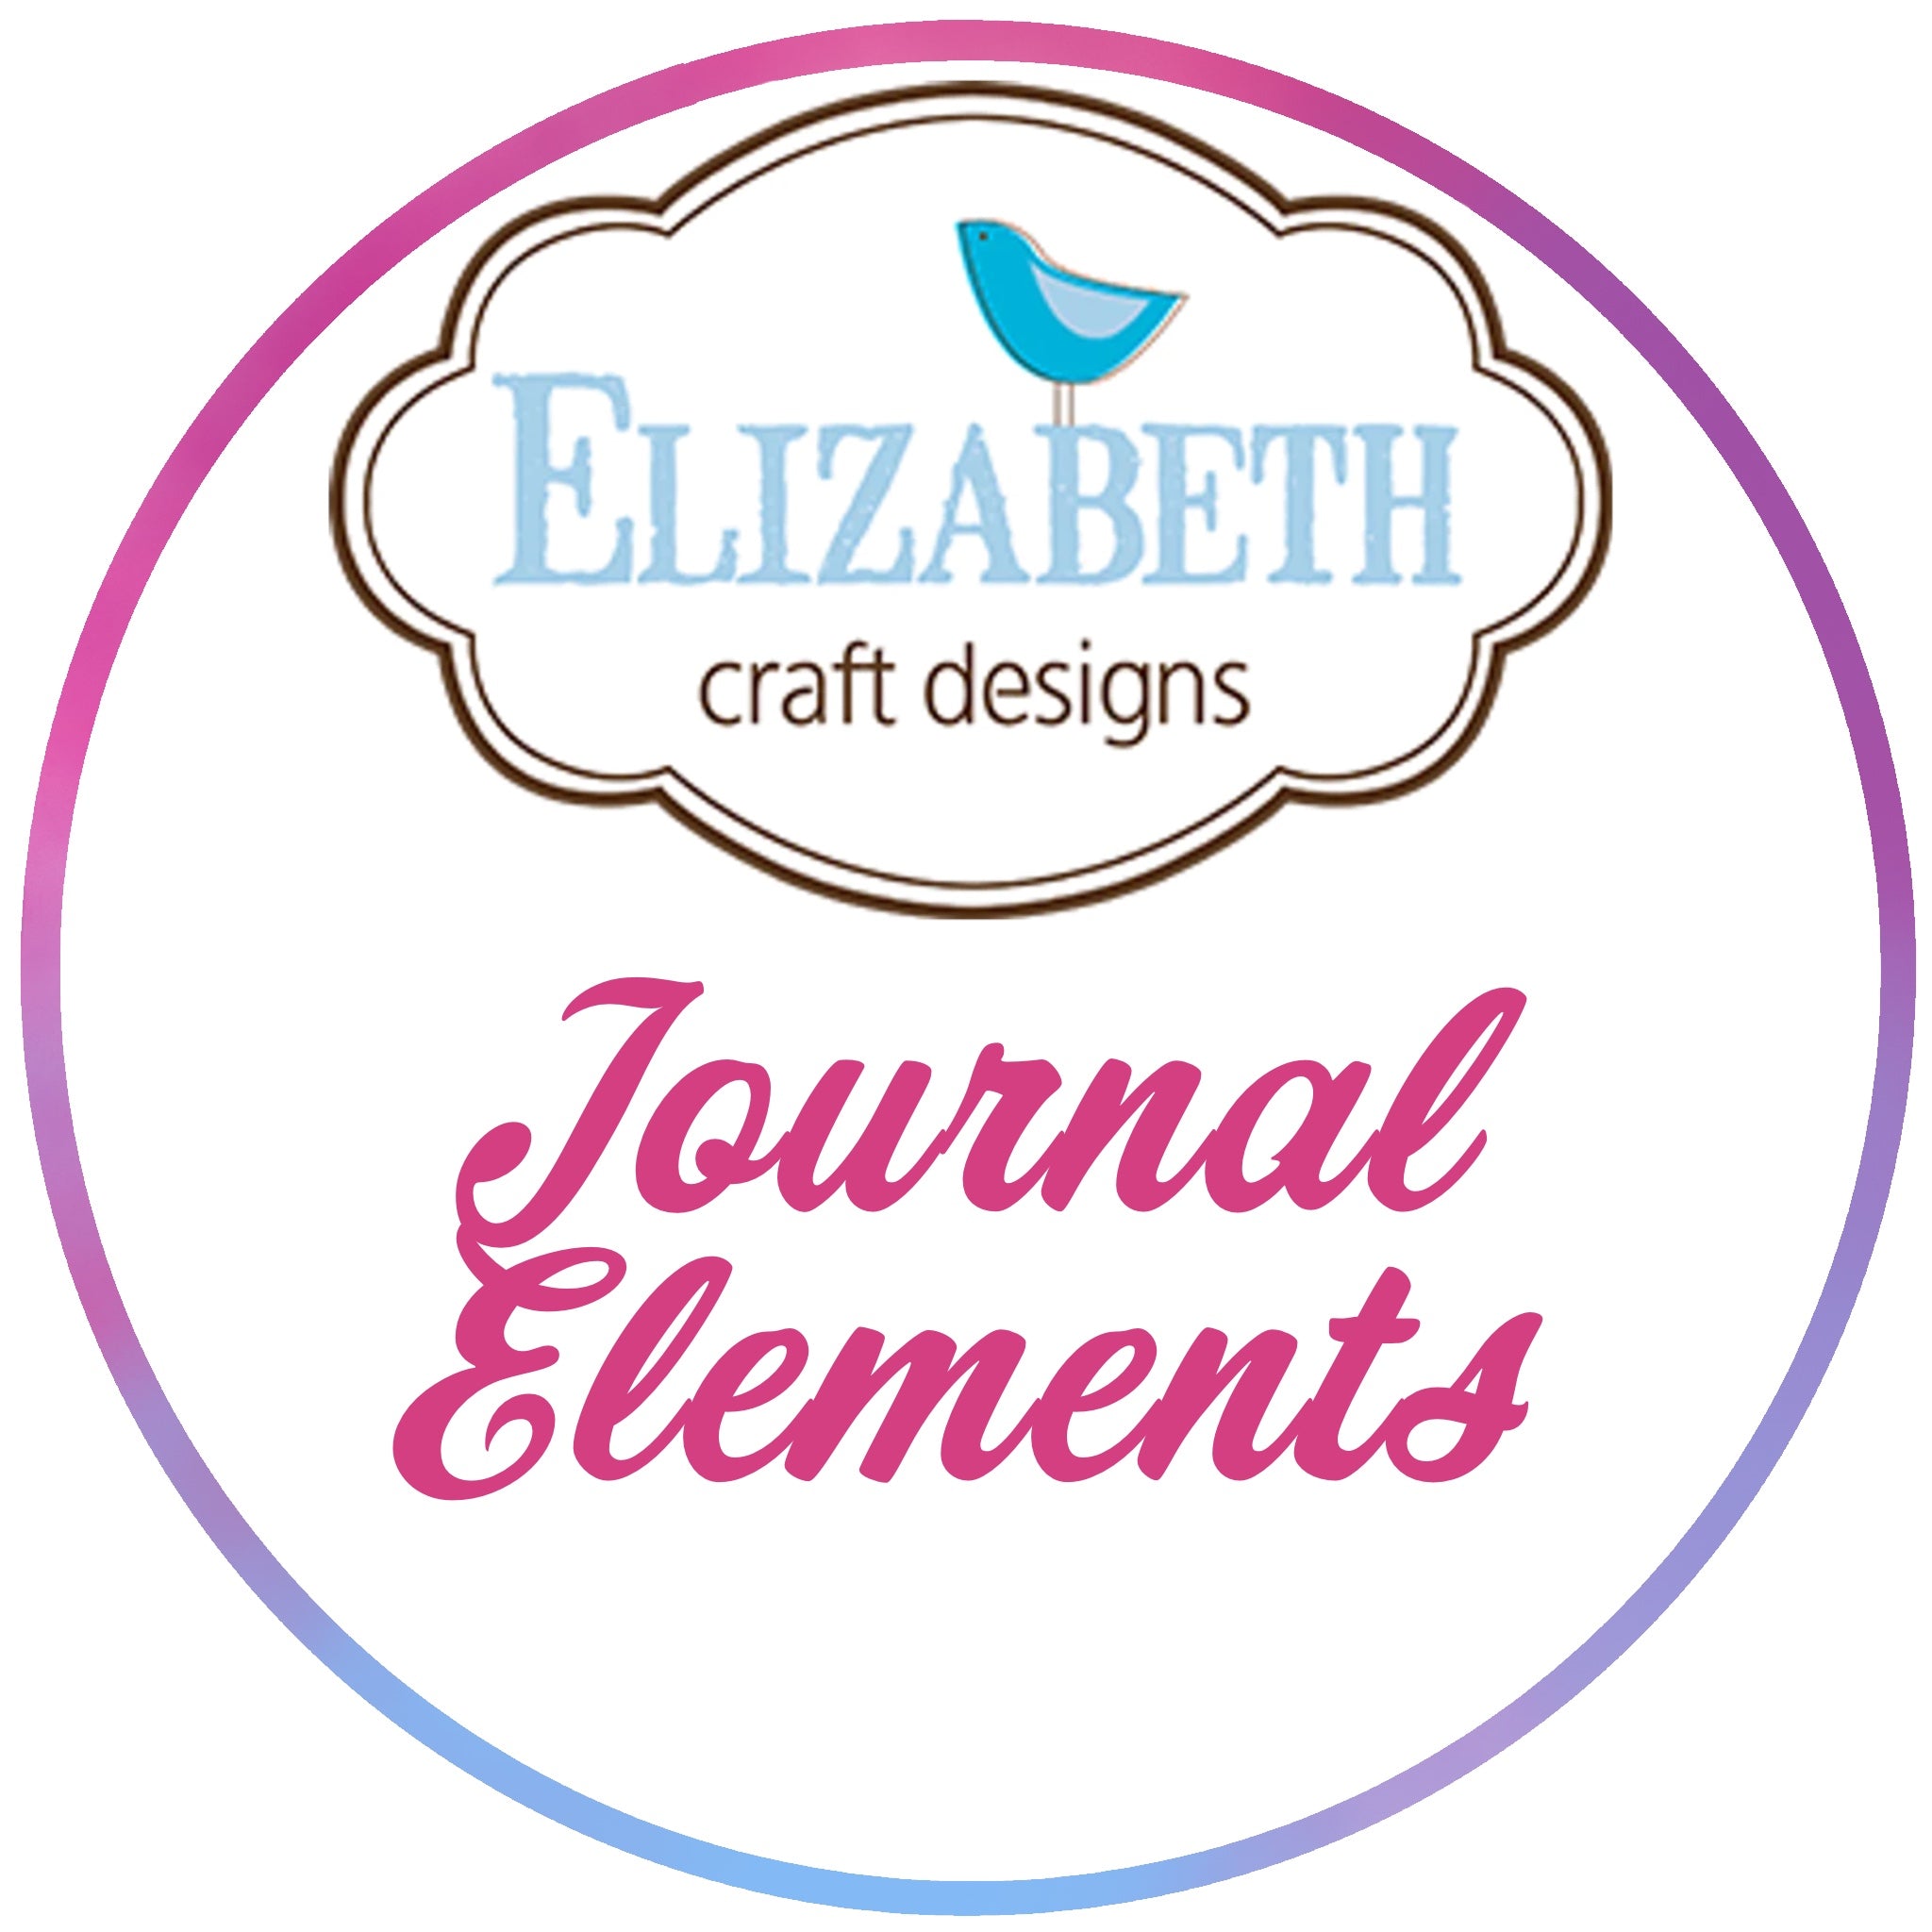 BUY IT ALL: Elizabeth Craft Designs Journal Elements Collection